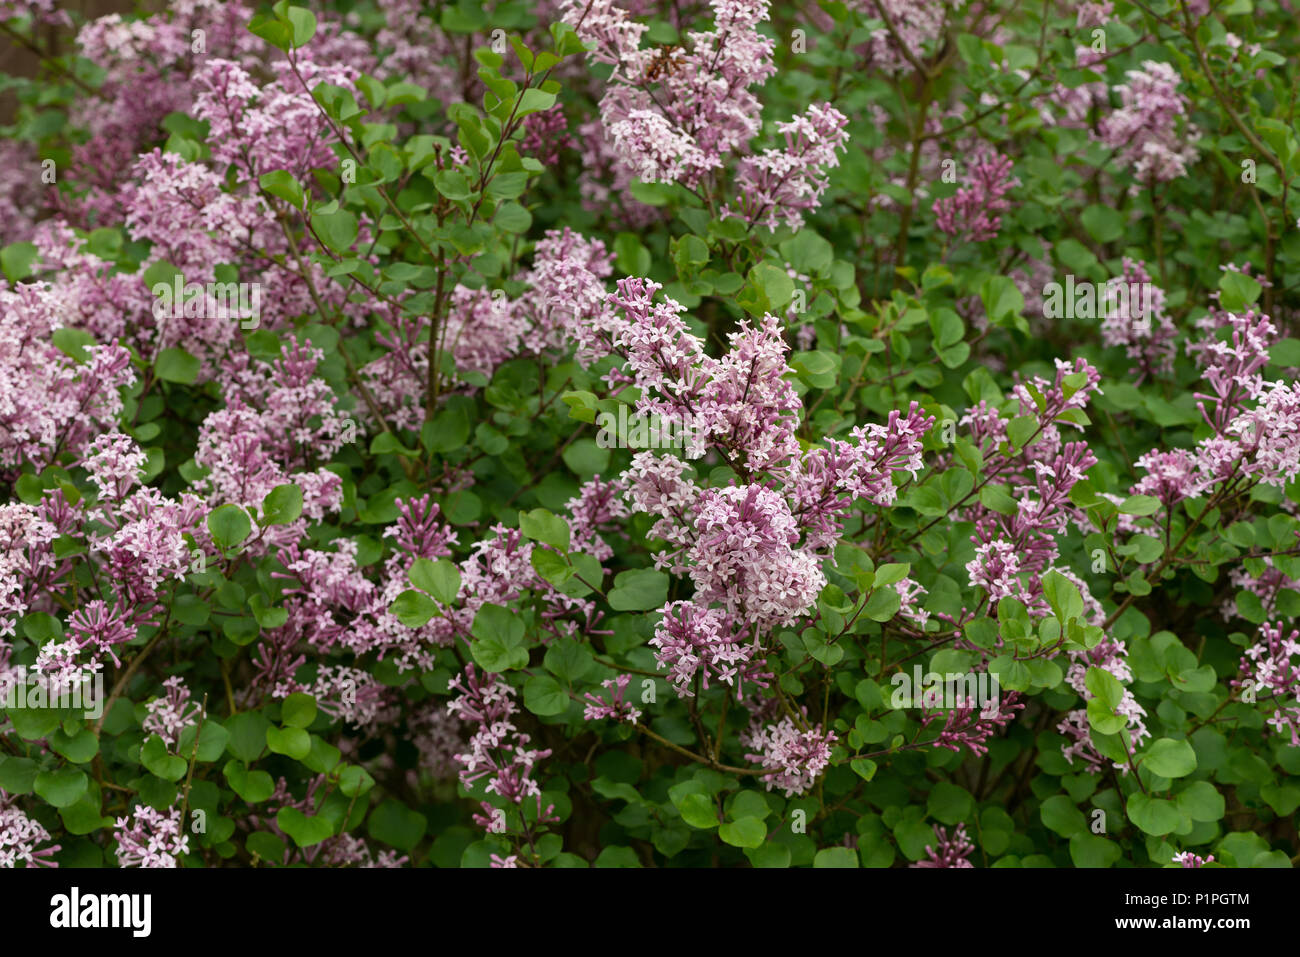 Delicate fresh blossom of miniature lilac tree, Syringa microphylla,  showing variations of pink flowers heavily fragrant Stock Photo